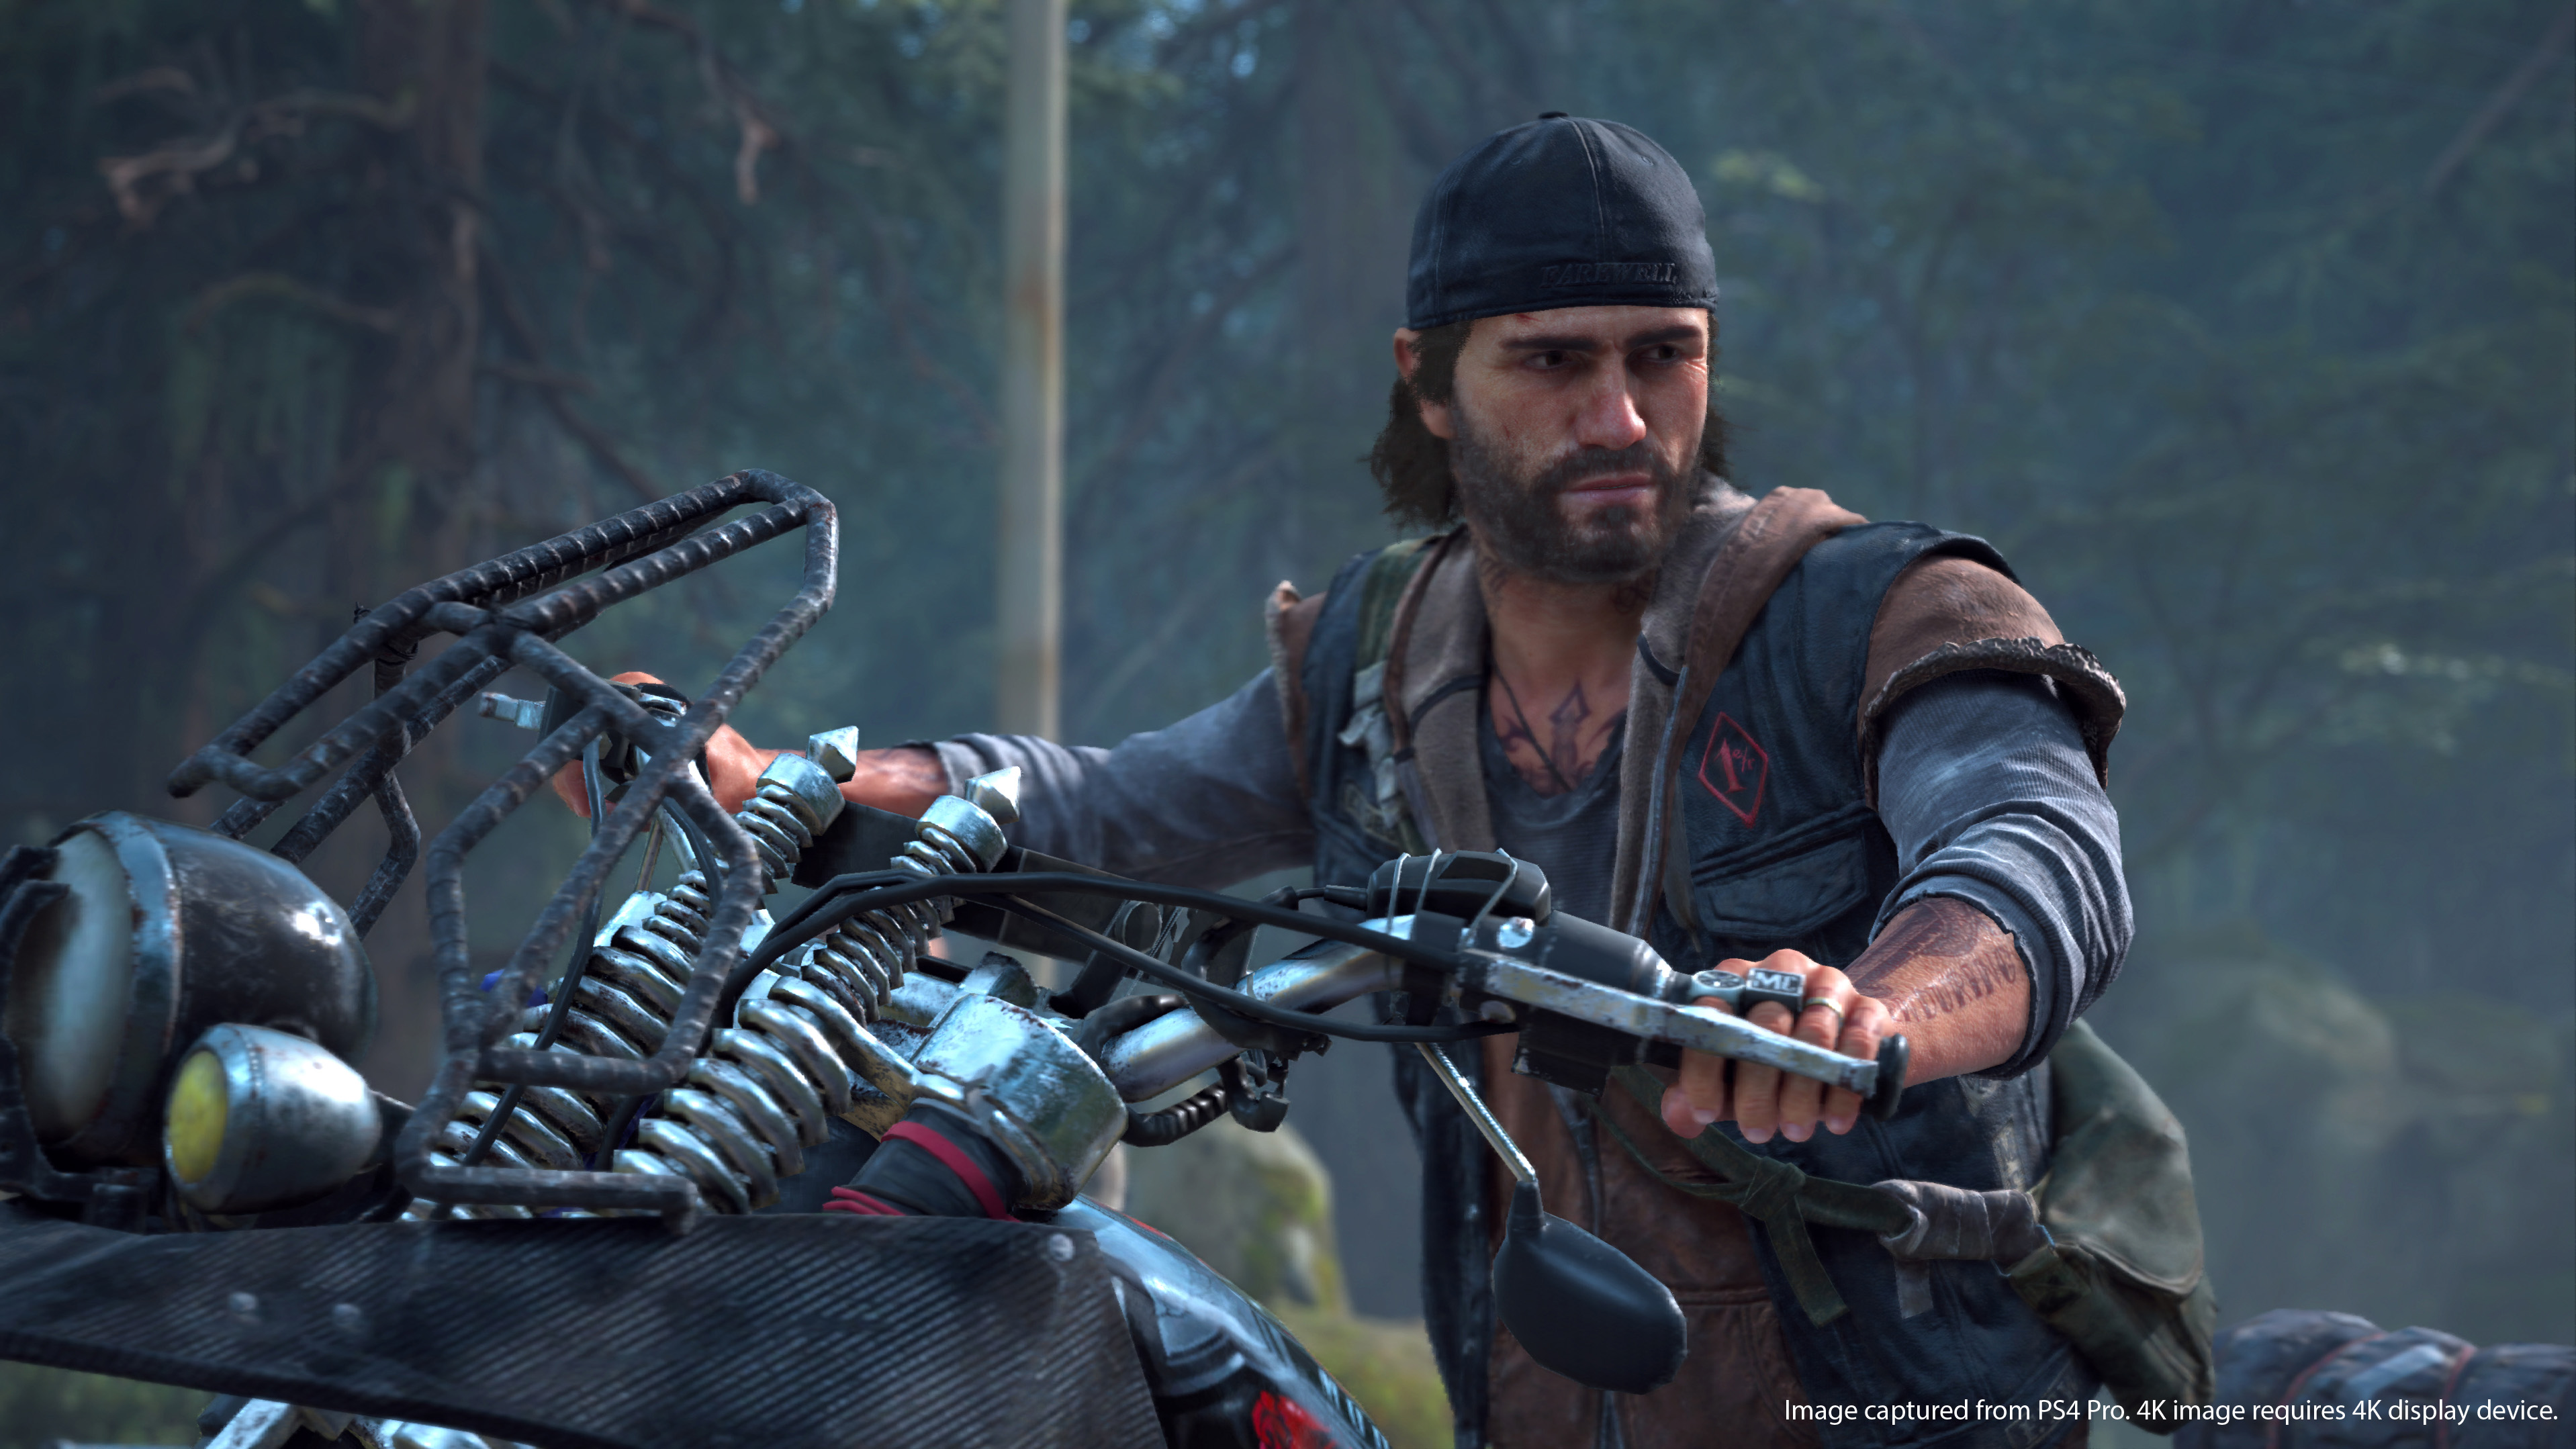 General 3836x2158 Days Gone video games biker bend studios Playstation 4 Pro PlayStation PlayStation 4 Deacon St John video game characters